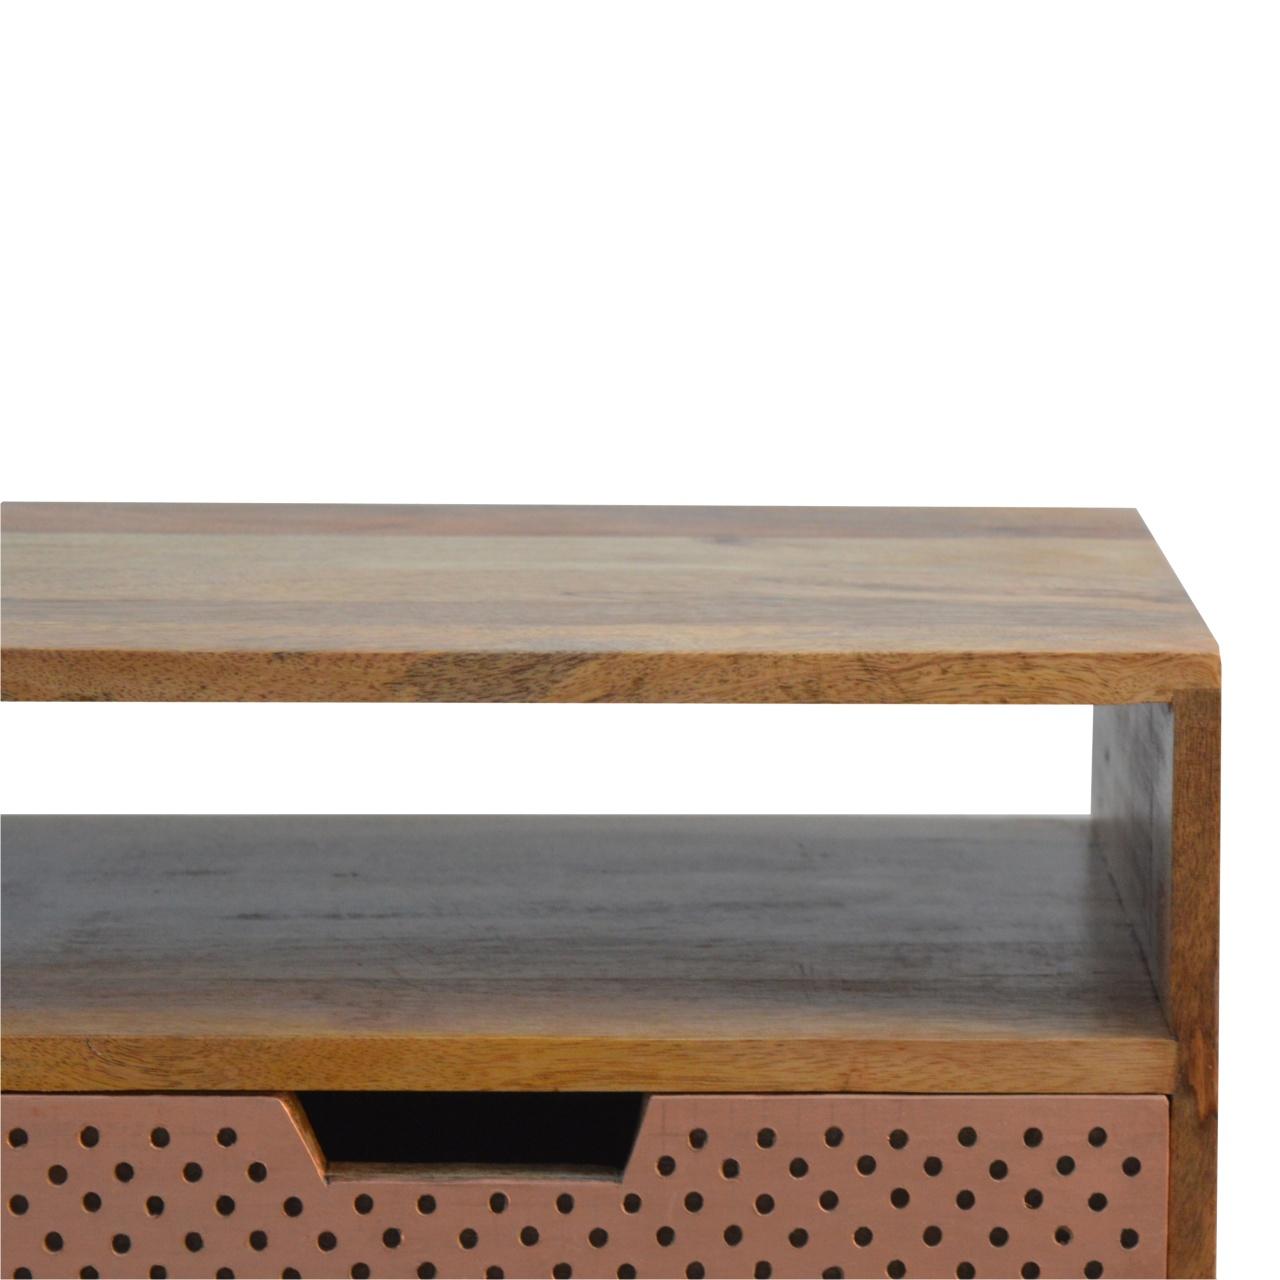 Perforated Copper Bedside With Open Slot